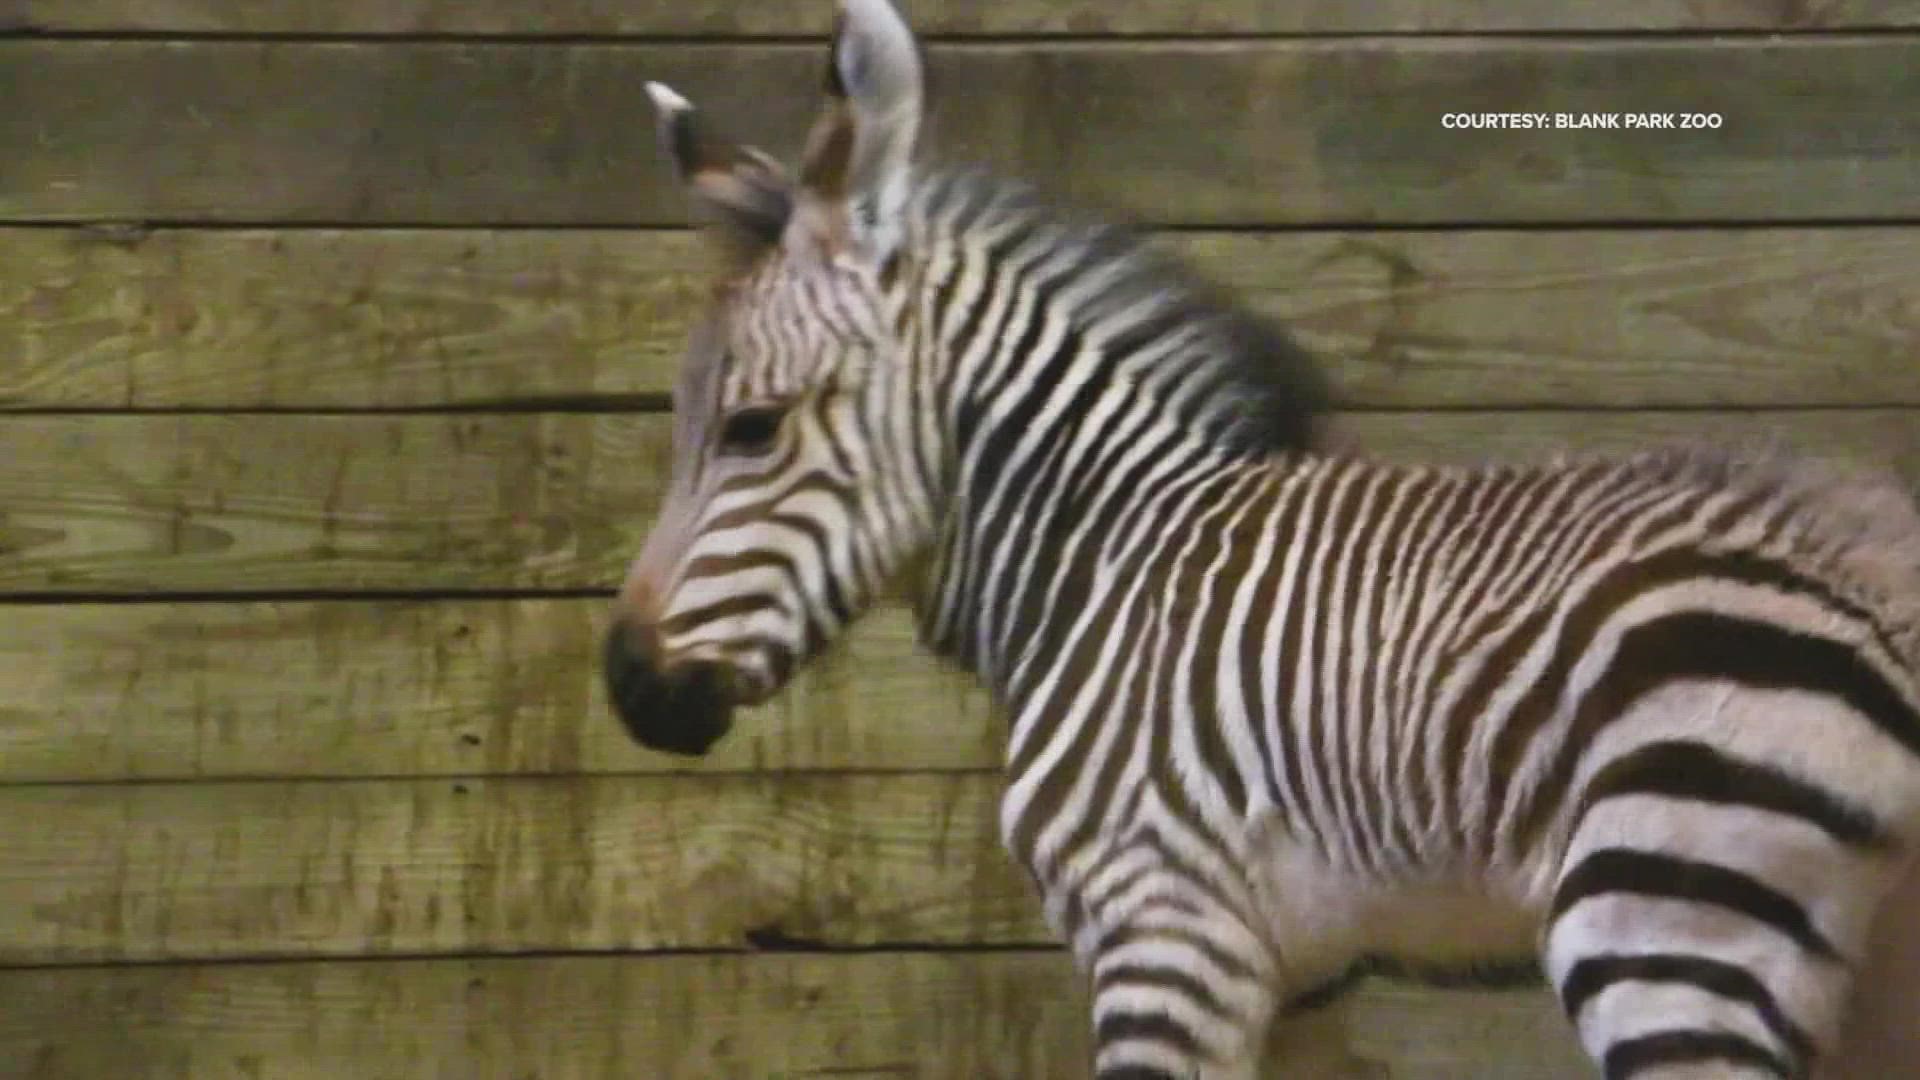 "Dakota" the Hartmann's Mountain Zebra foal and "Perkins" the Addox calf born in past two months at the Blank Park Zoo are now on exhibit for all to enjoy!